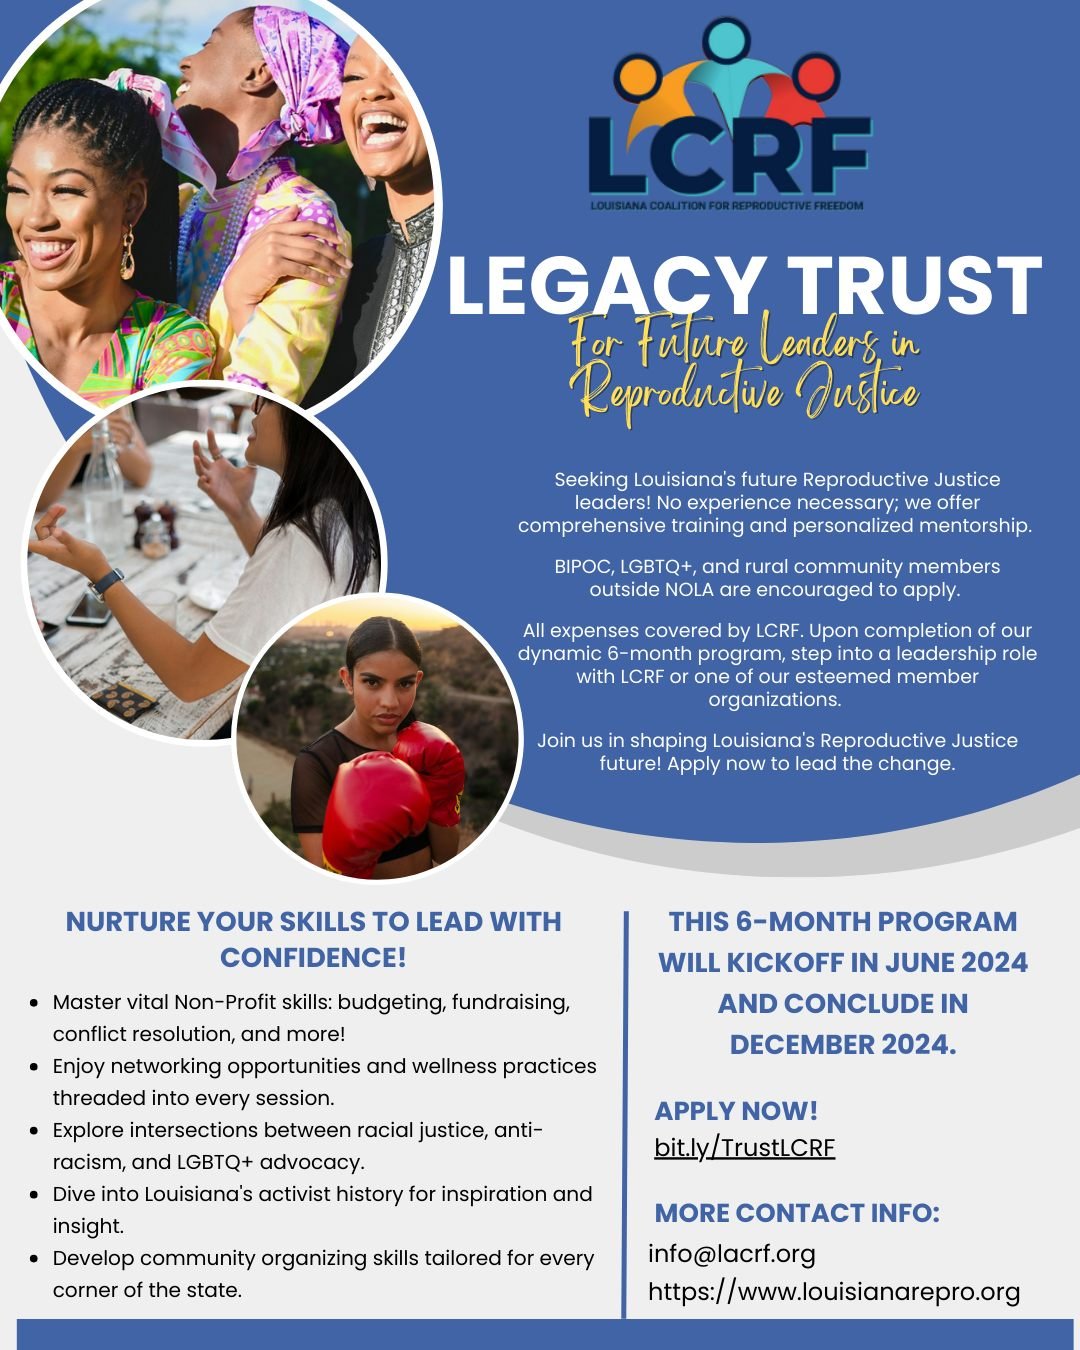 Applications to the Legacy Trust close May 24. Emerging leaders will gain skills and relationships need to become repro leaders! Apply today and pass it on!